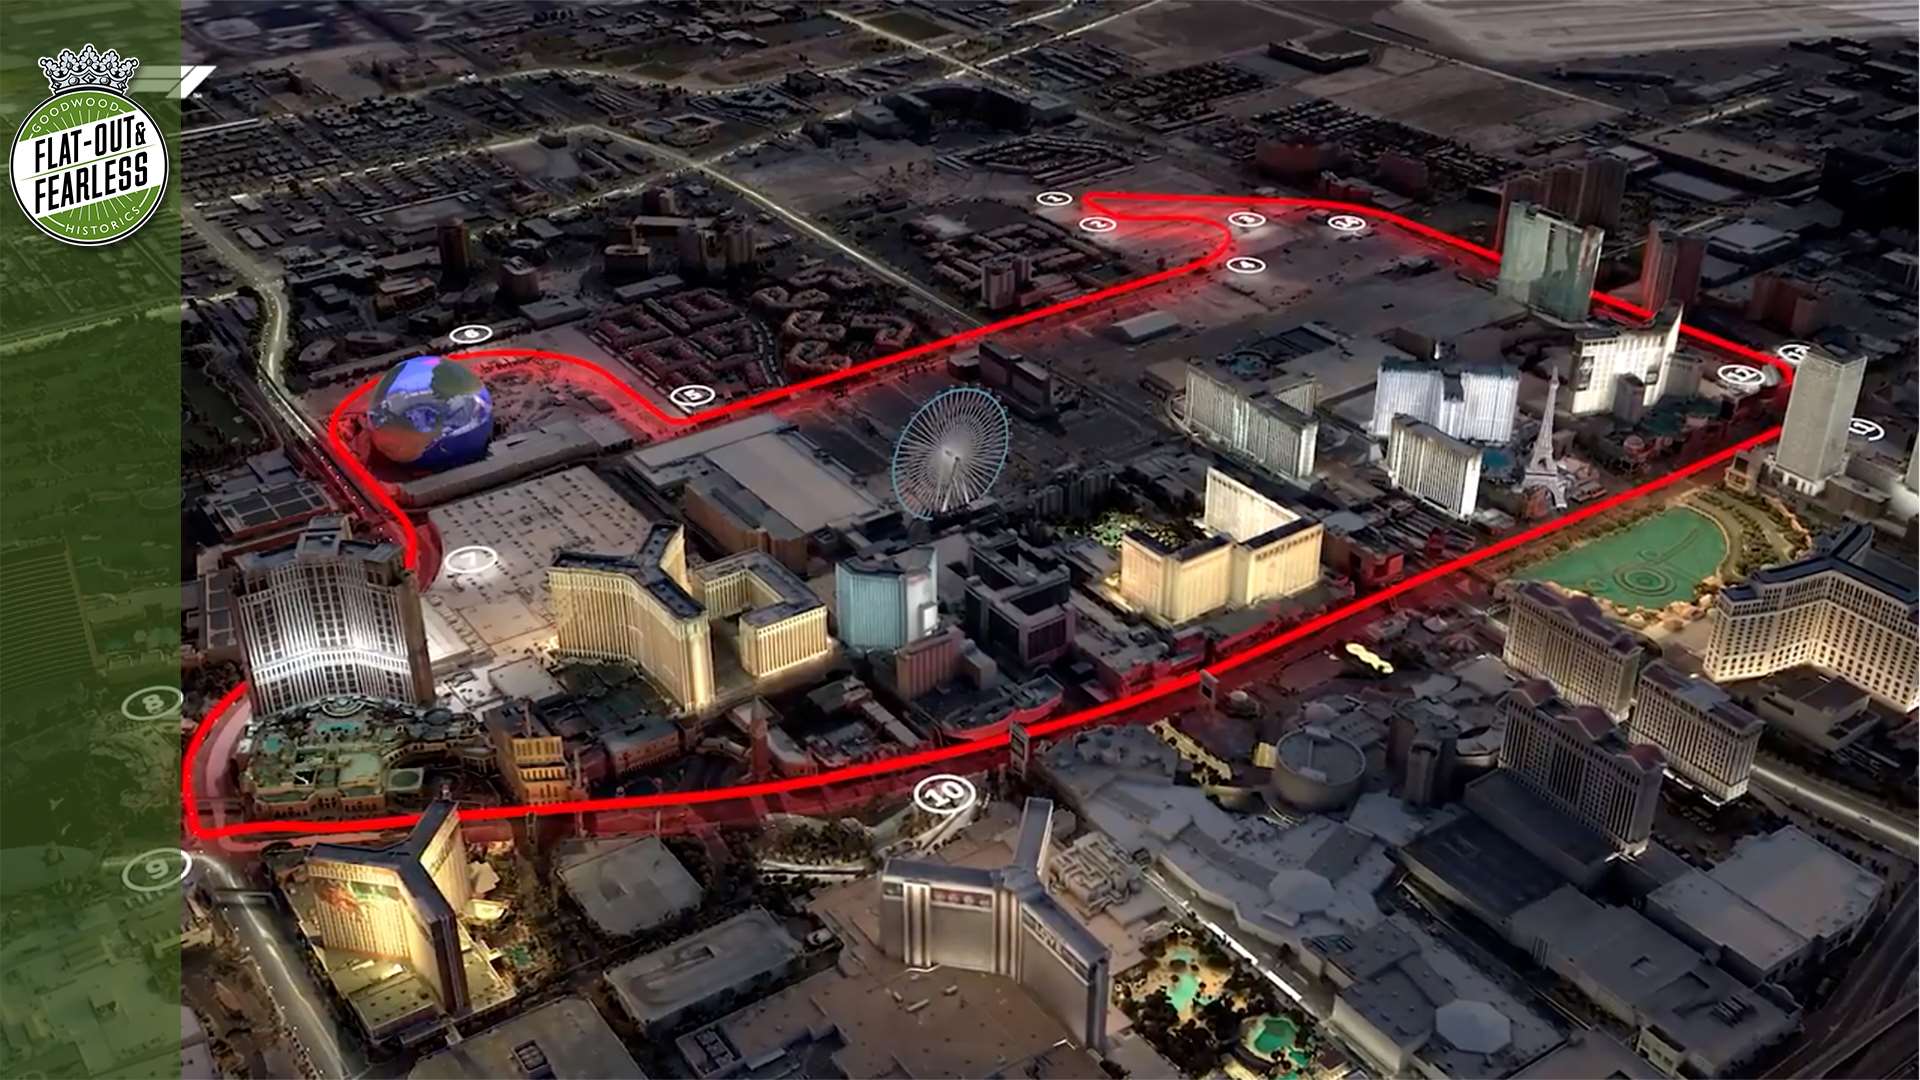 [Video] A first look at the new Las Vegas F1 circuit layout GRR